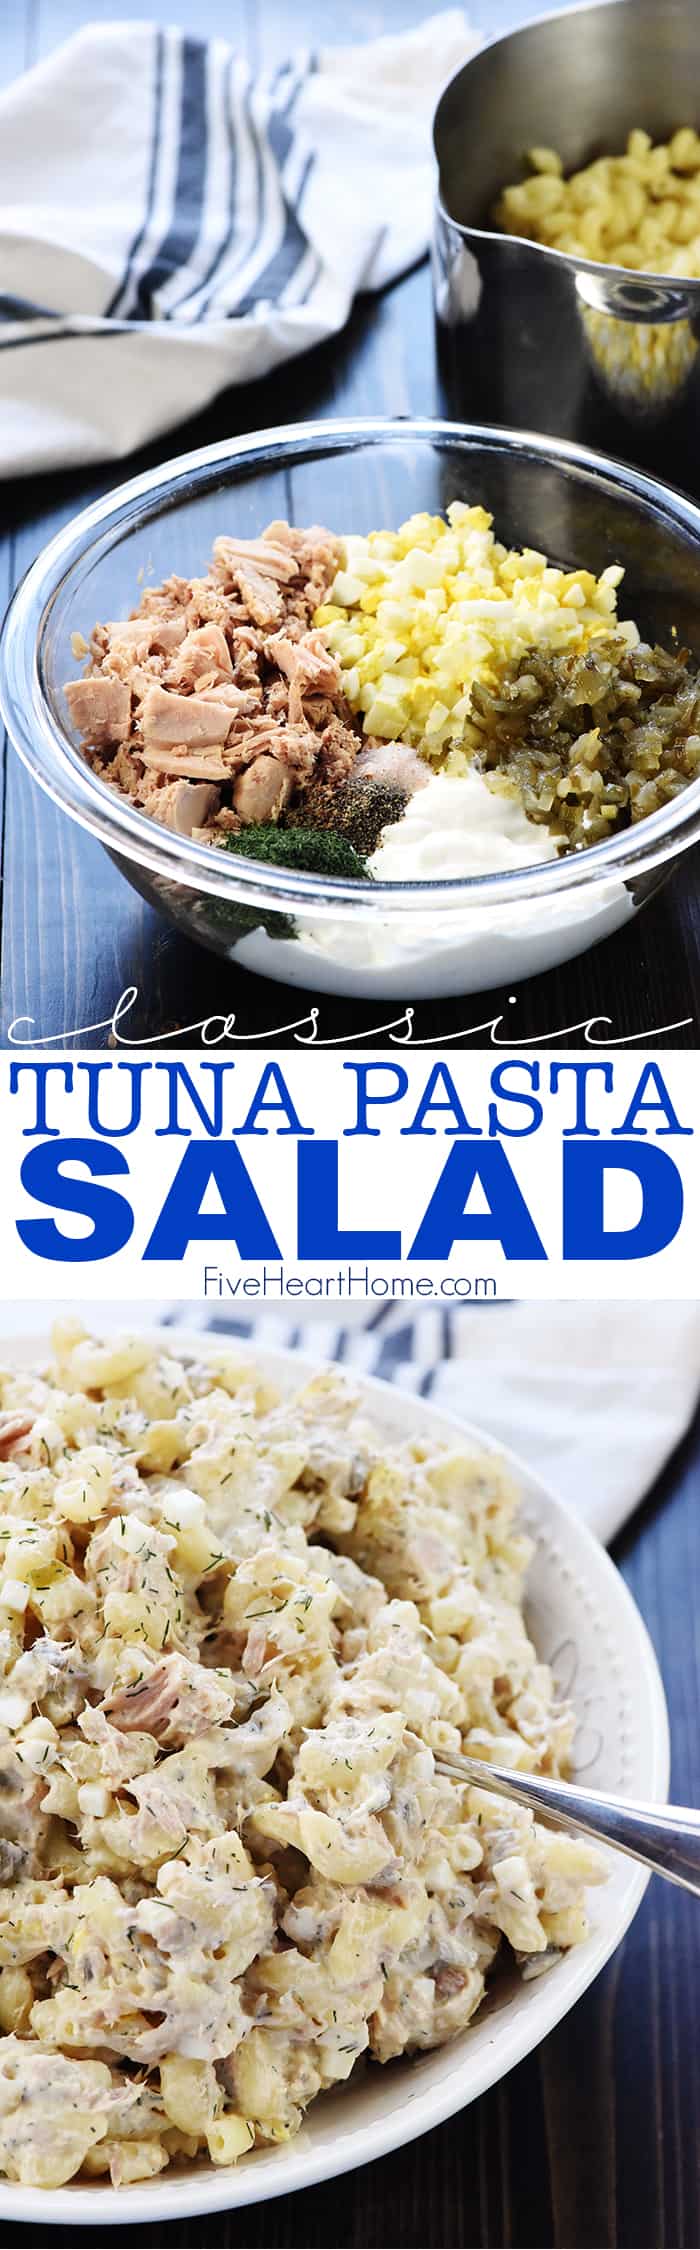 Classic Tuna Pasta Salad ~ with healthier whole wheat macaroni, hard-boiled eggs, two kind of pickles, and fresh dill in a lightened-up dressing of mayonnaise and Greek yogurt, this simple recipe is great for lunch or dinner! | FiveHeartHome.com via @fivehearthome